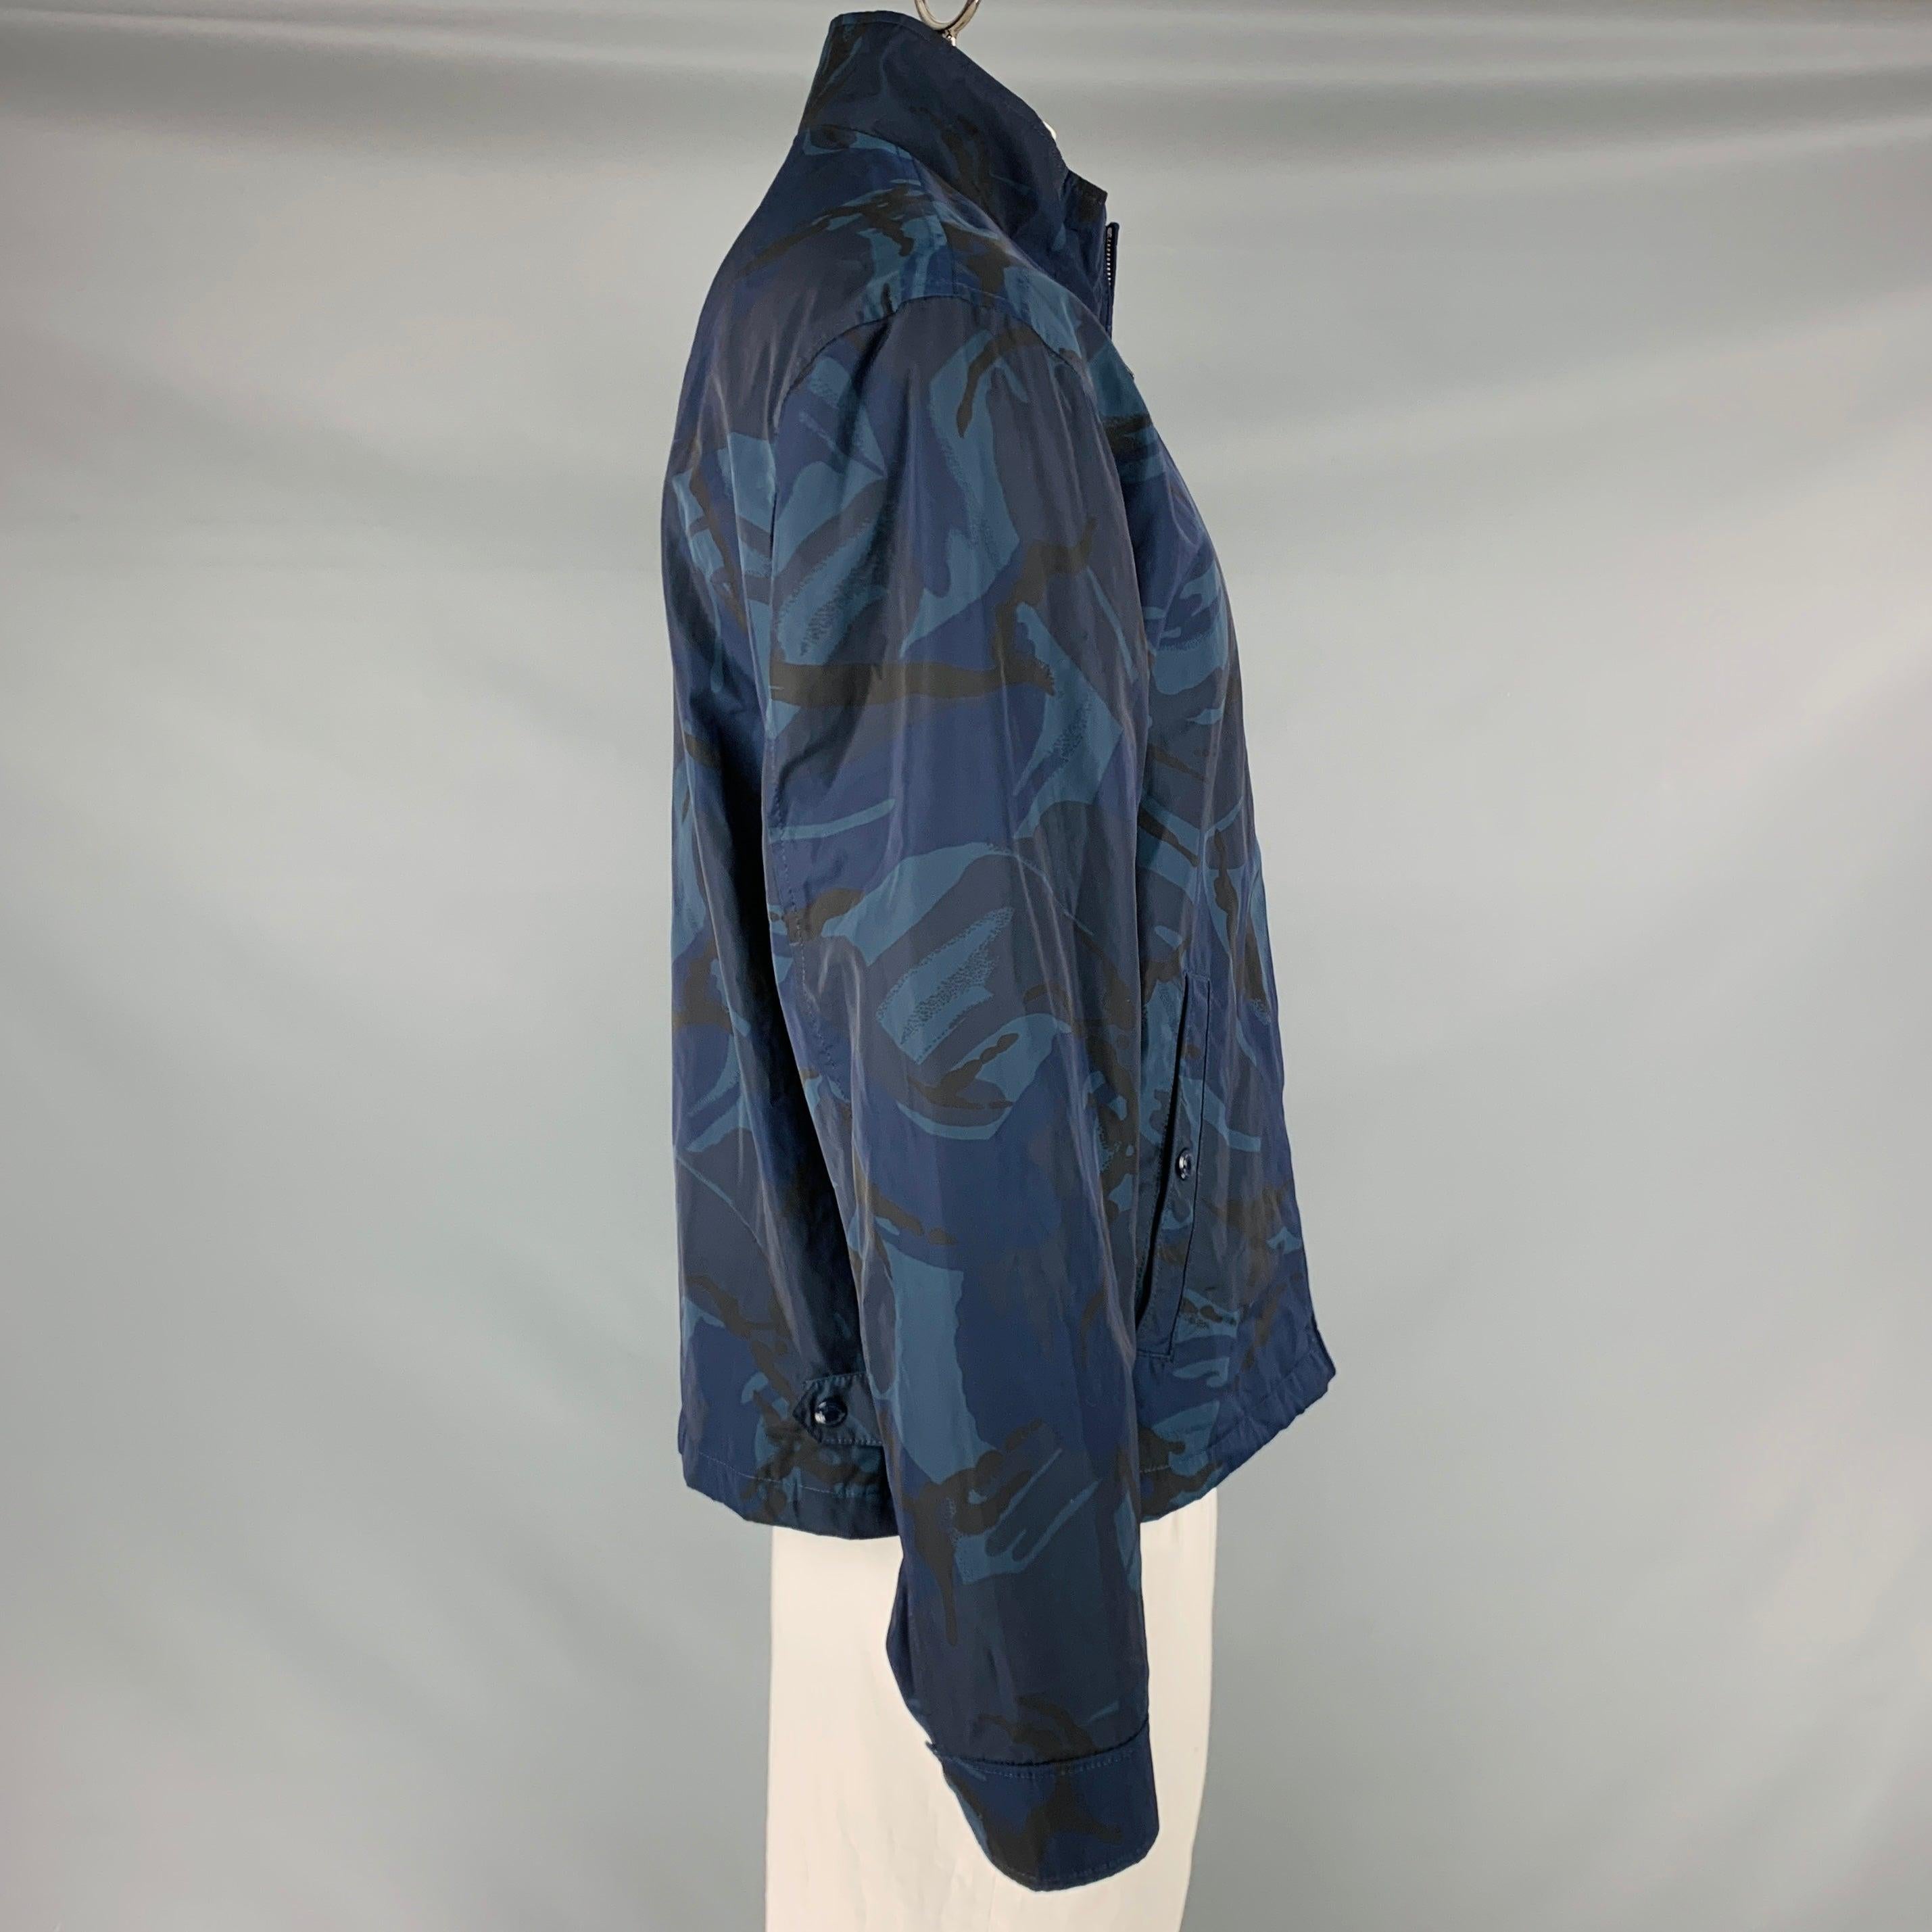 POLO by RALPH LAUREN jacket
in a navy and blue polyester fabric featuring camouflage pattern, two snap pockets, and zip up closure. Made in Italy.New with Tags. 

Marked:   XL 

Measurements: 
 
Shoulder: 19.5 inches Chest: 48 inches Sleeve: 26.5